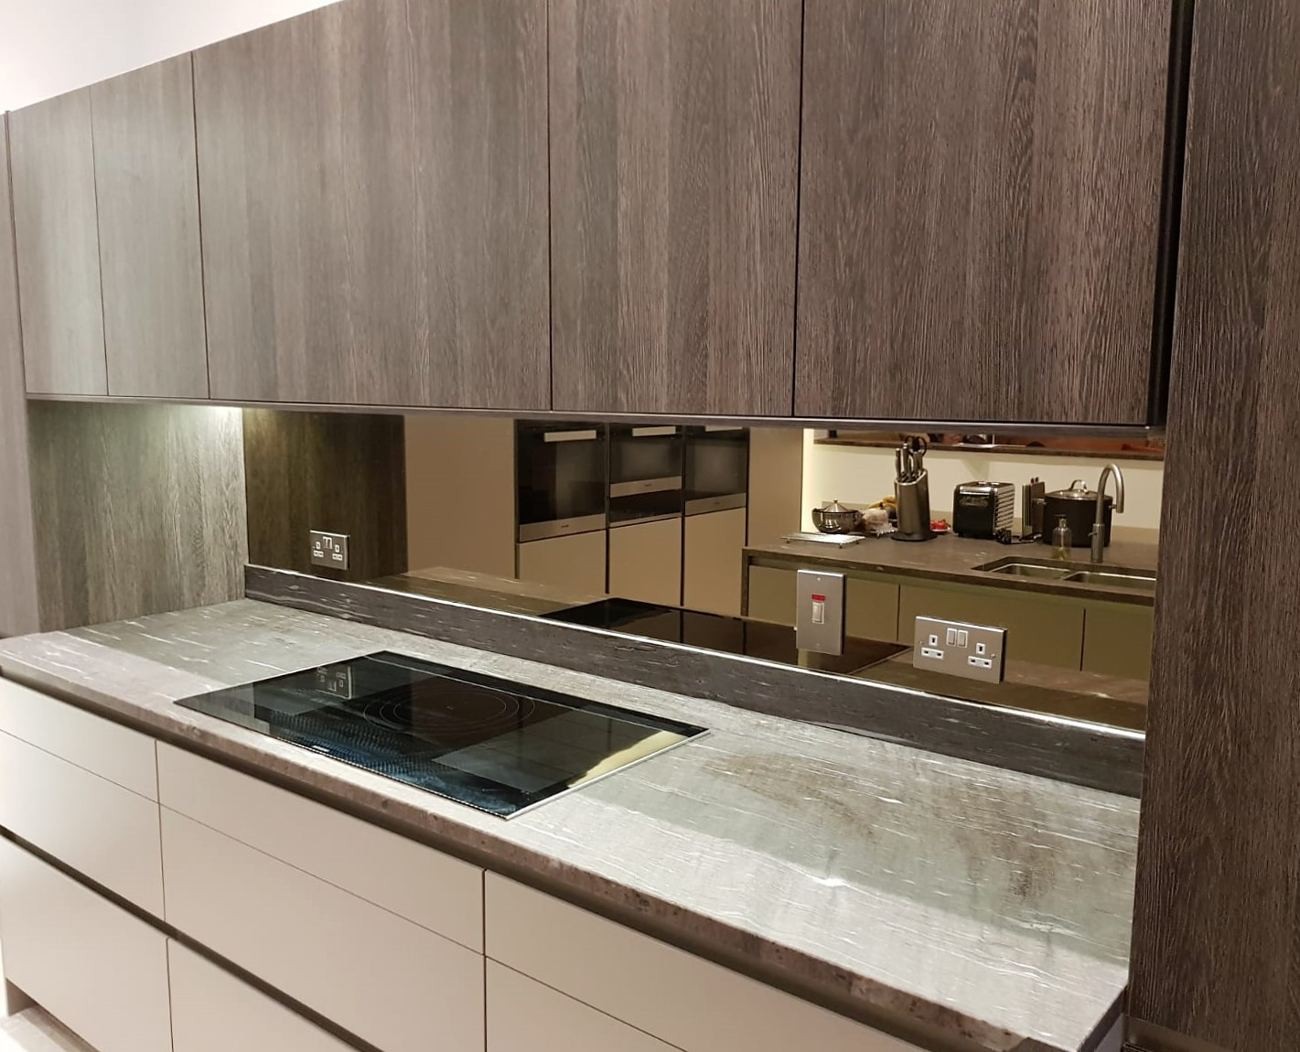 A kitchen with wooden cabinets and a stainless steel stove featuring glass splashbacks for added elegance.